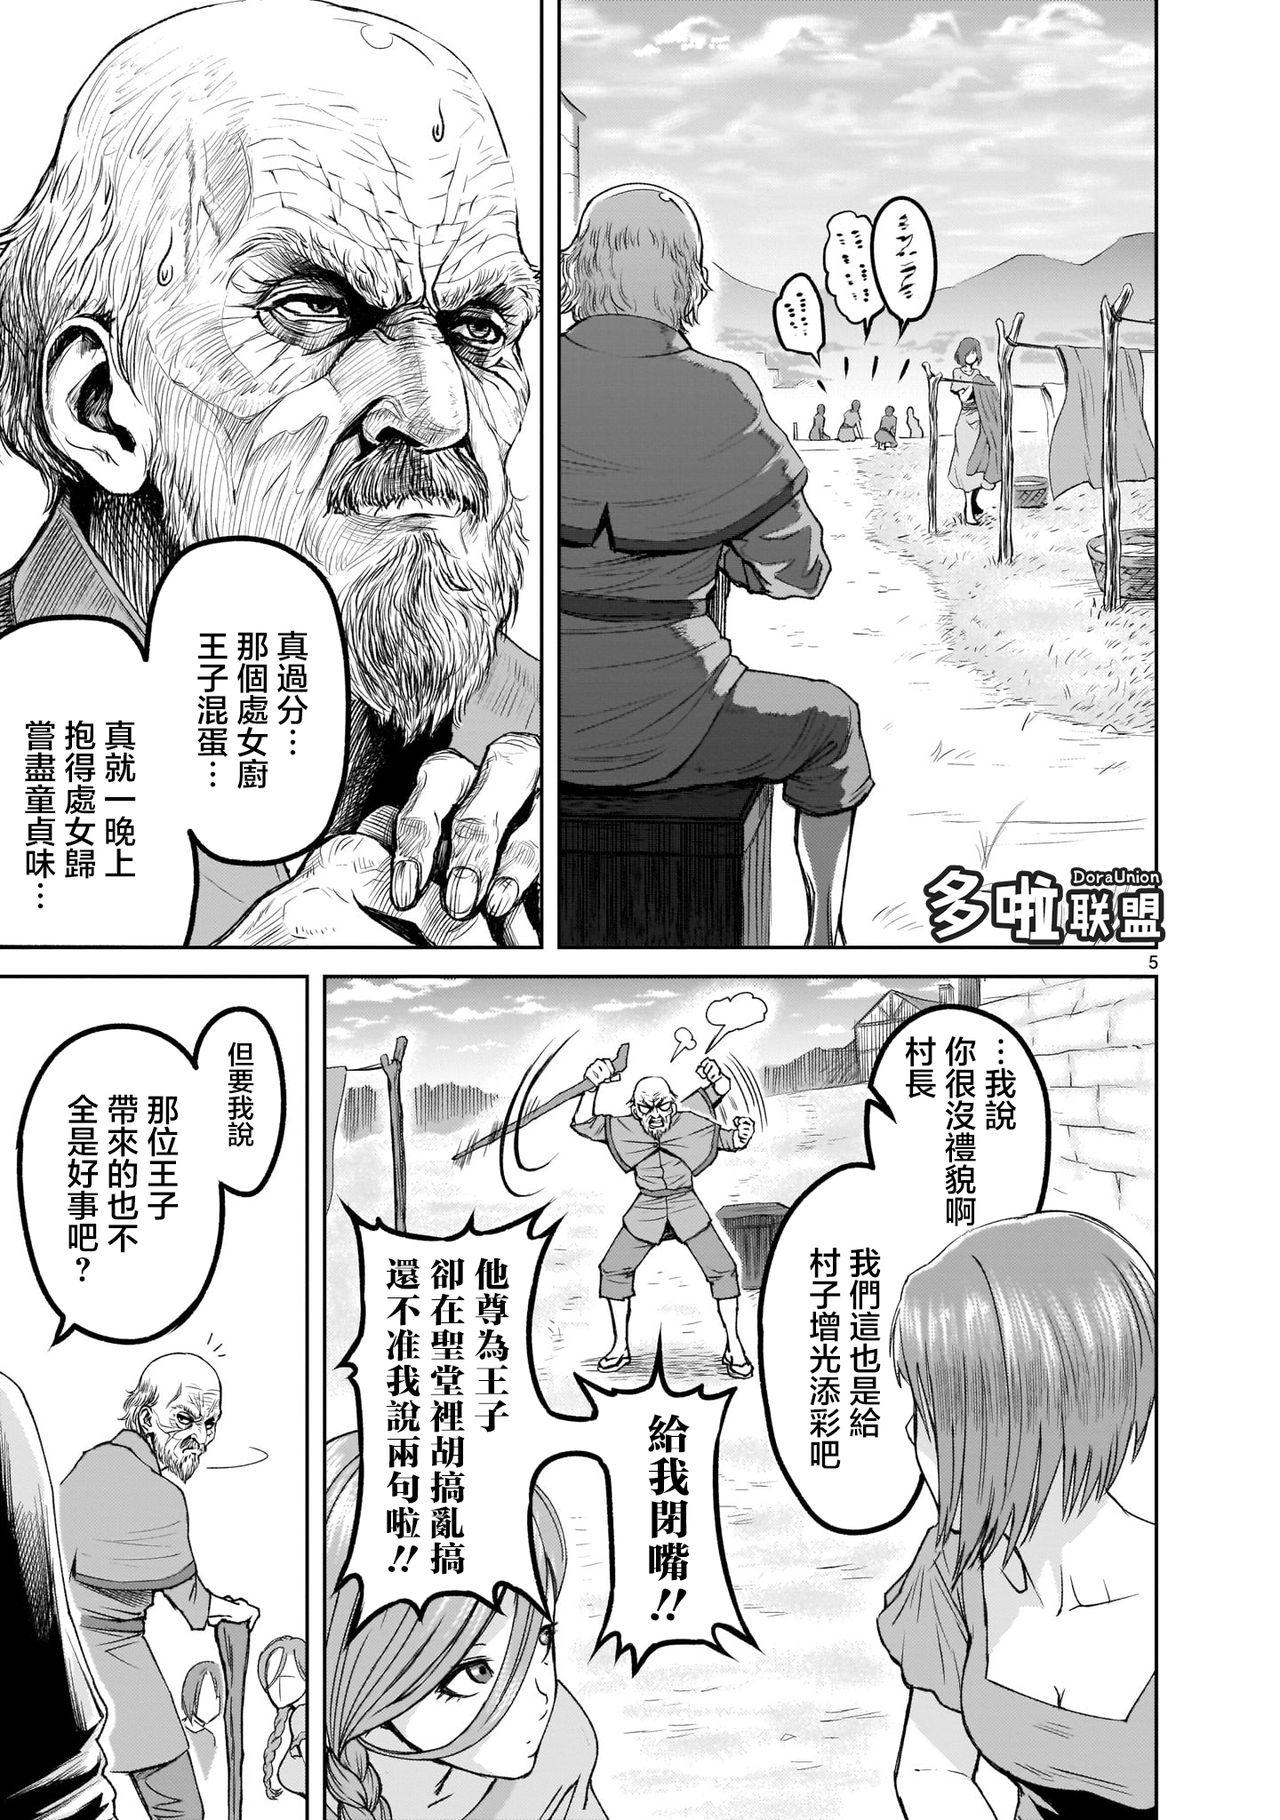 Blackmail 蔷薇园传奇 01-08 Chinese Married - Page 6